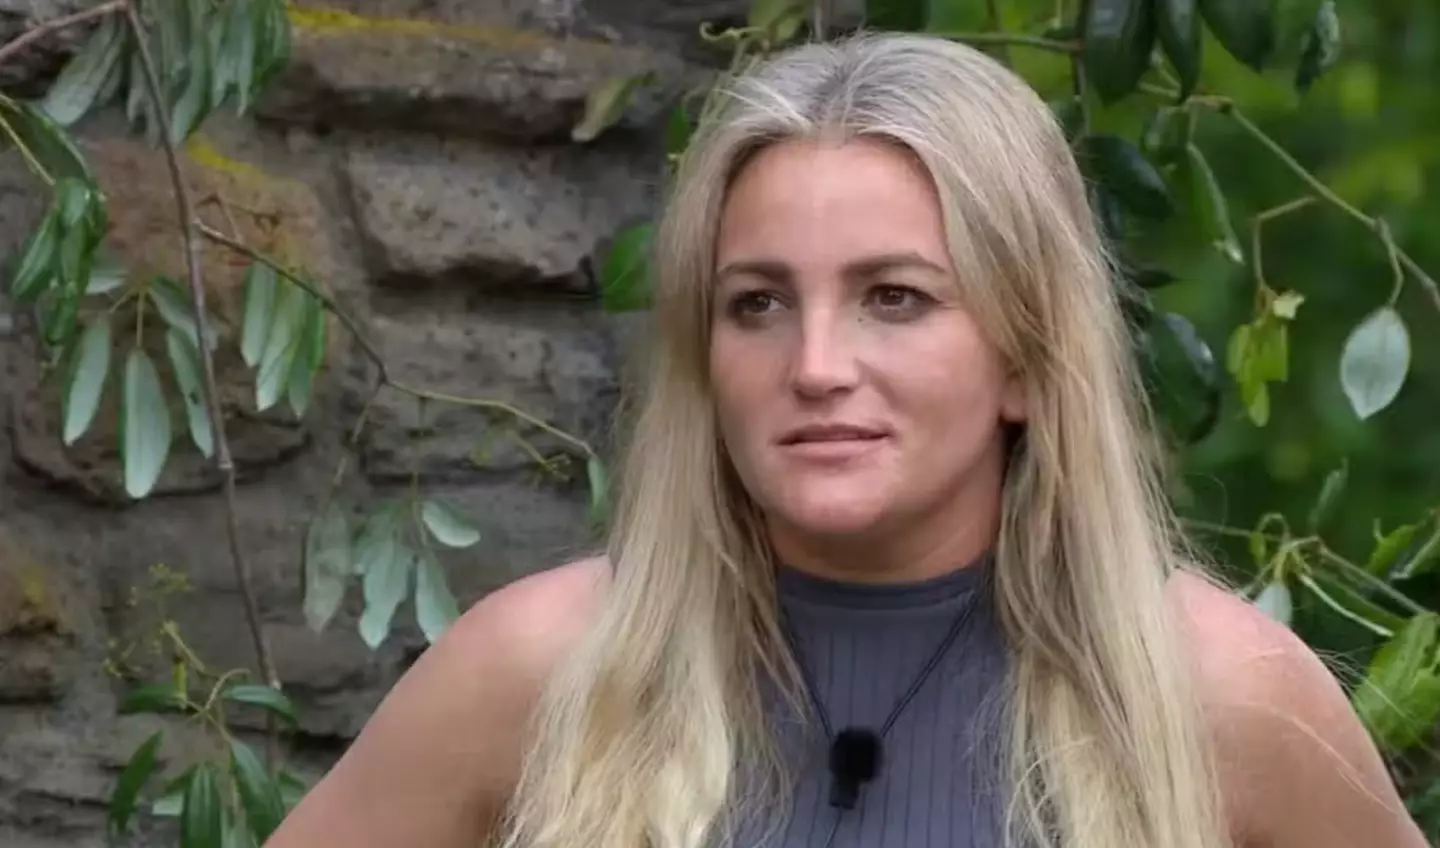 Jamie Lynn Spears is taking part in I'm A Celeb this year.